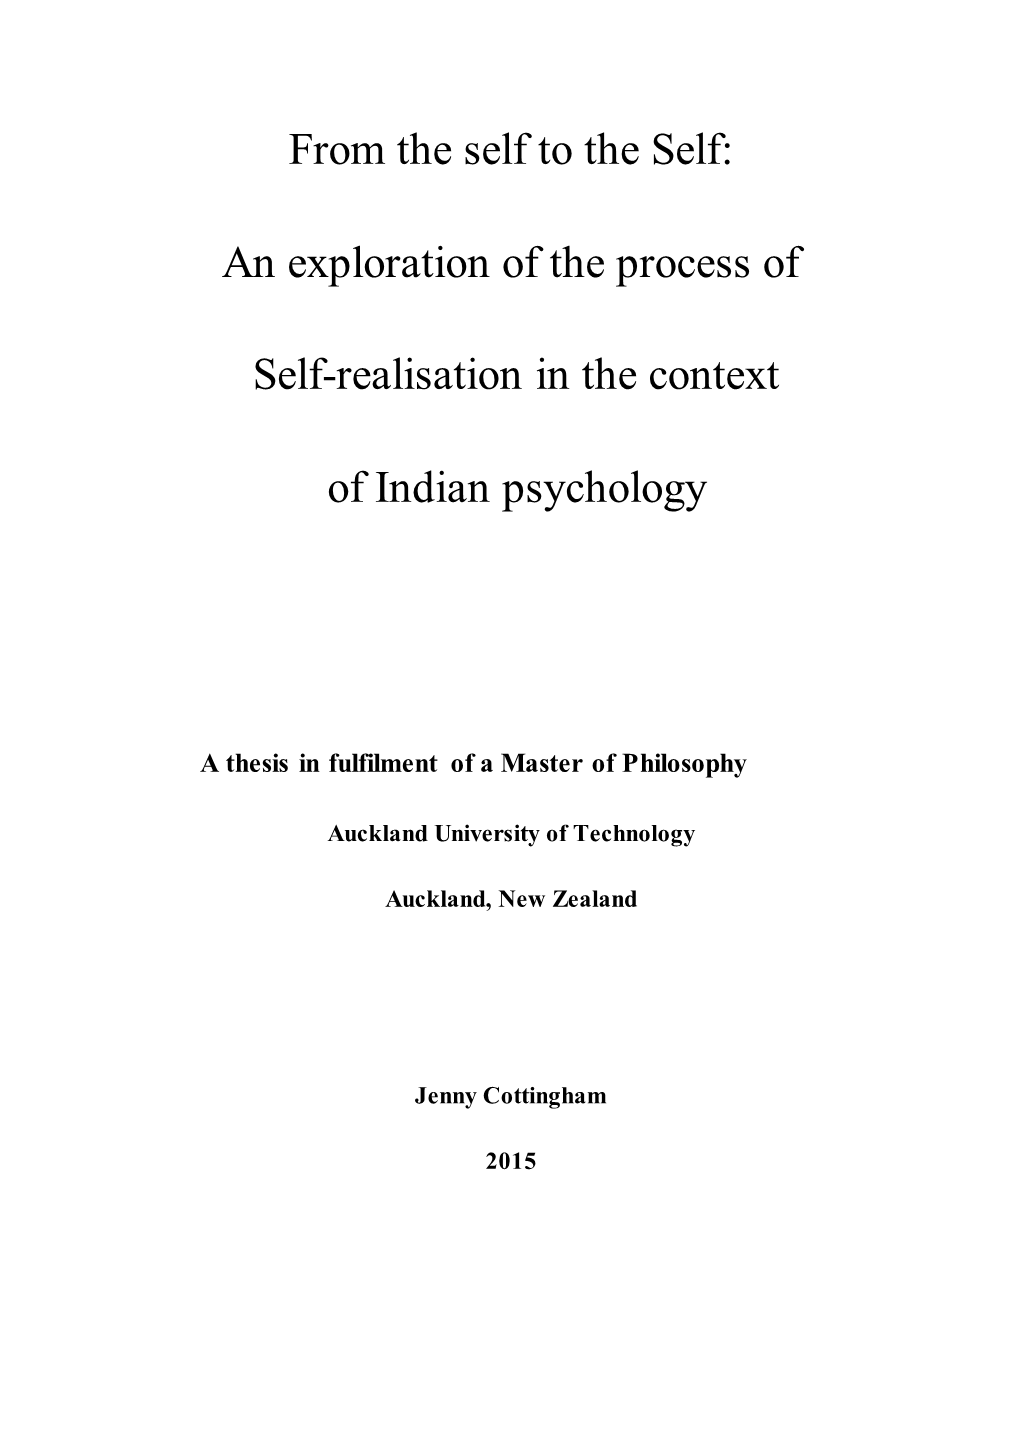 An Exploration of the Process of Self-Realisation in the Context Of